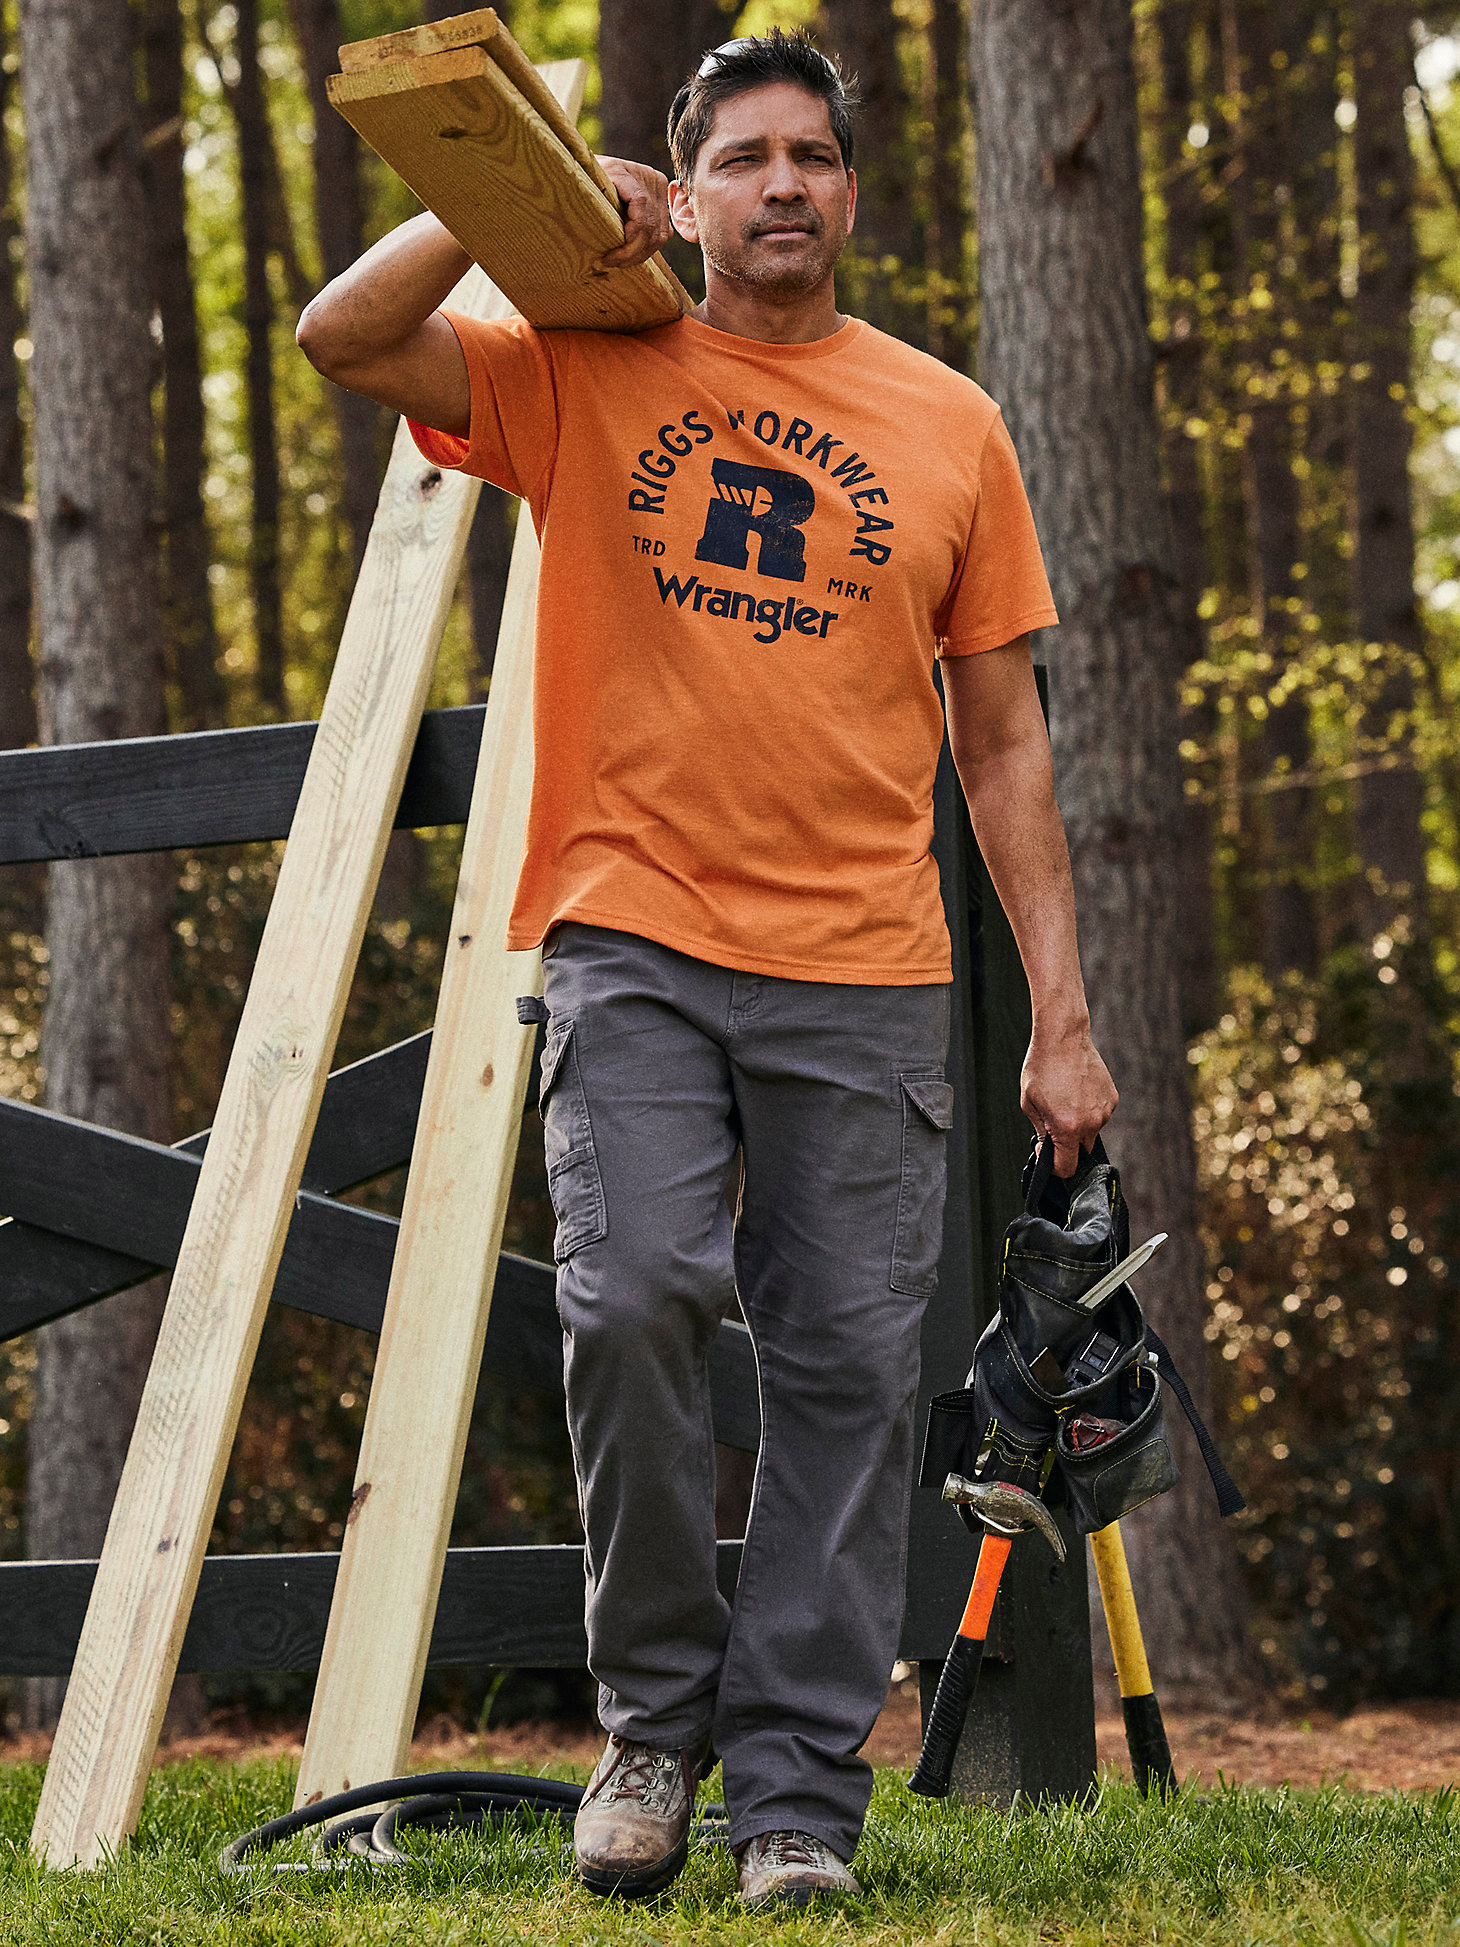 Wrangler® RIGGS Workwear® Advanced Comfort Lightweight Ranger Pant in Charcoal alternative view 1